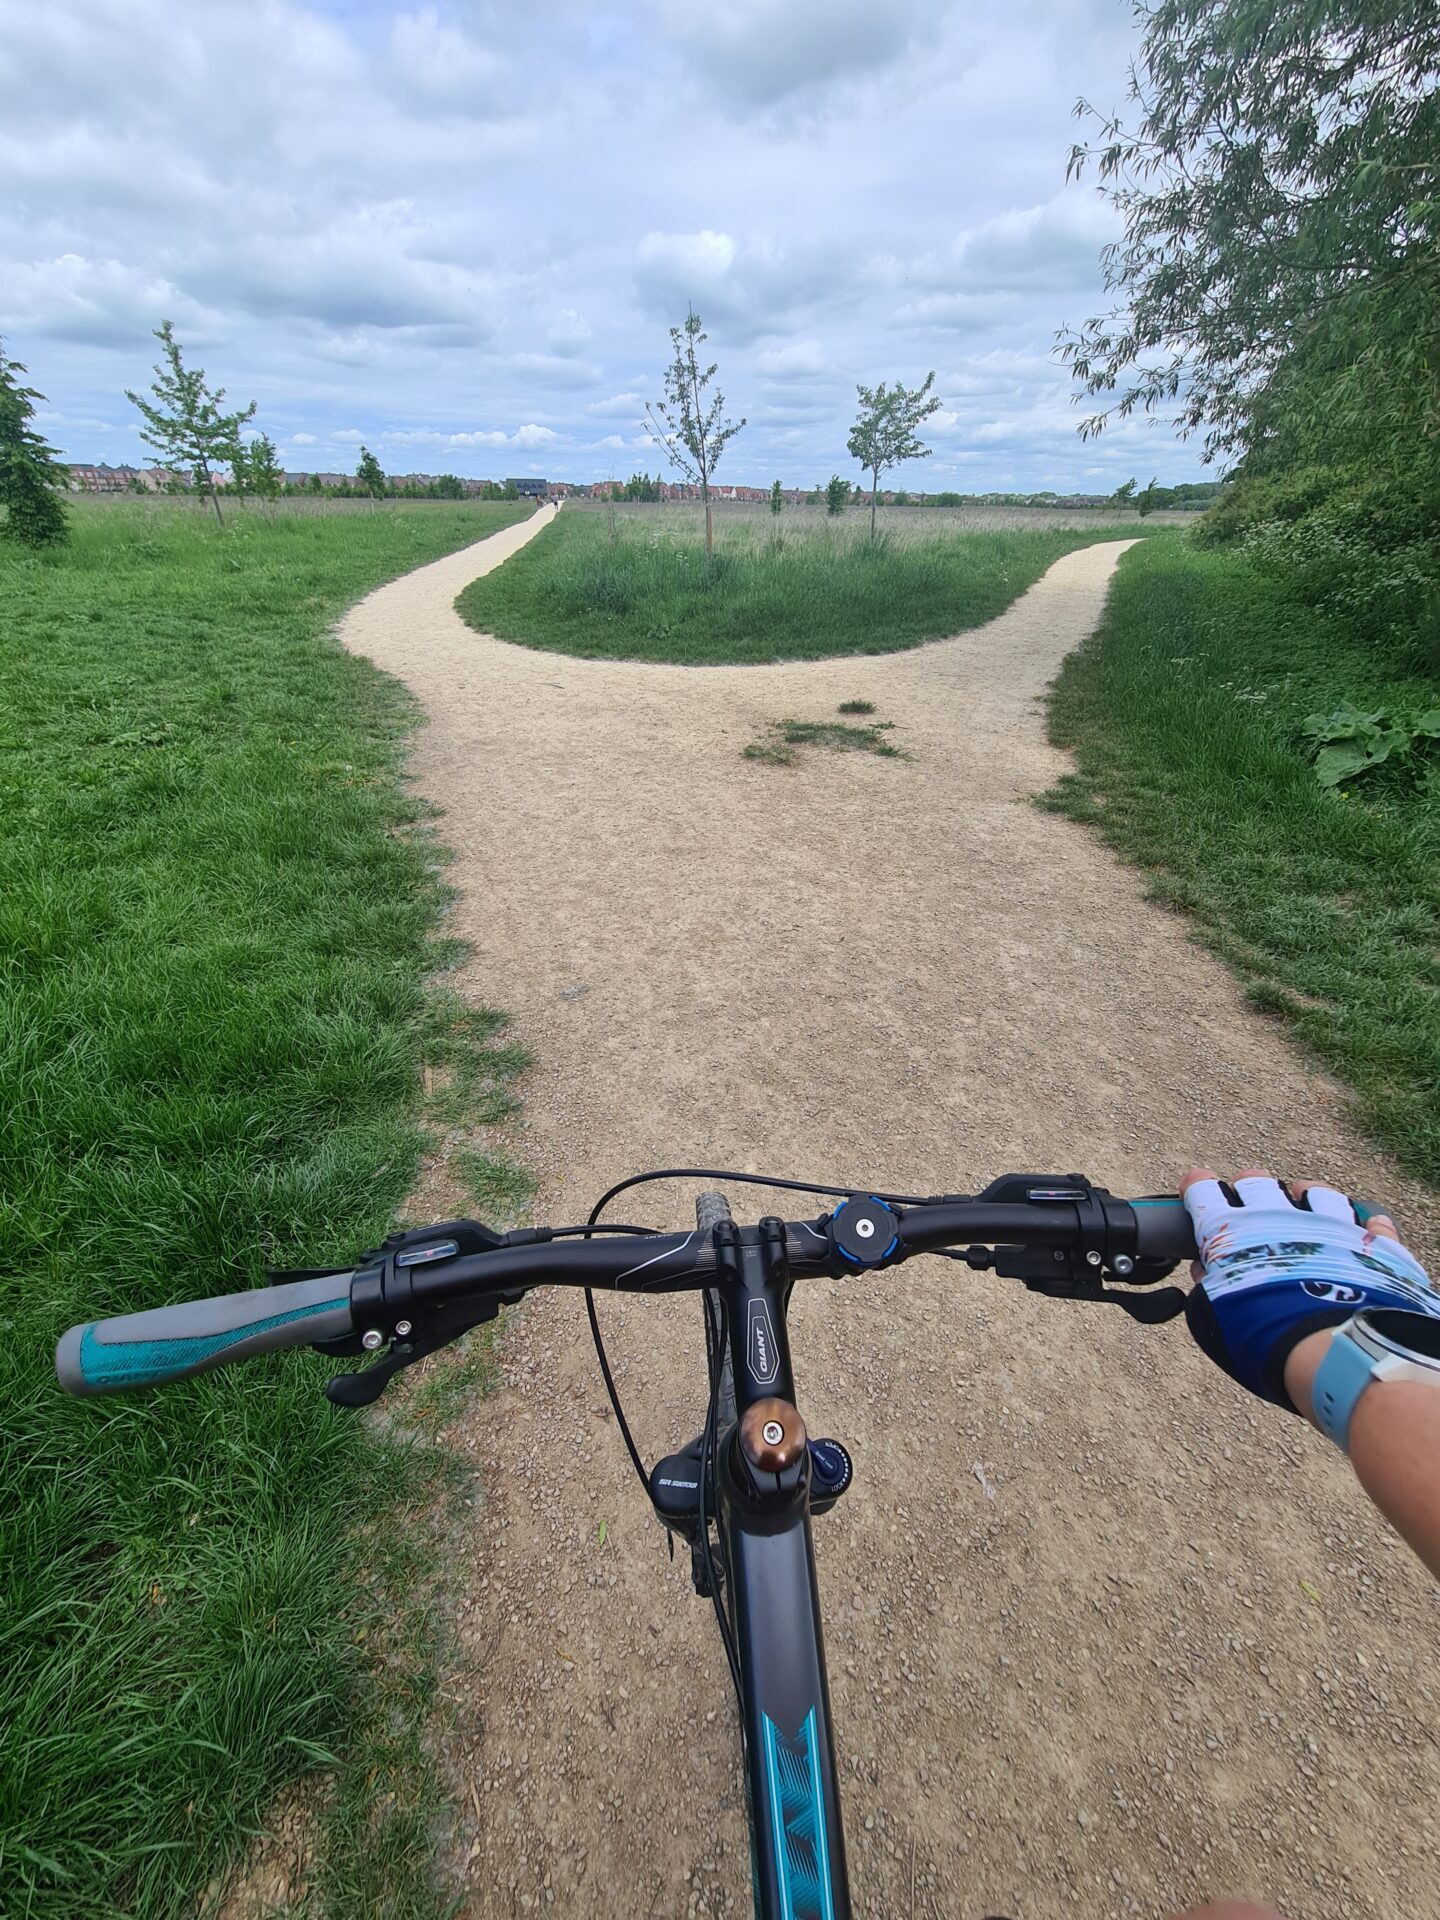 bike handlebars with one gloved hand gripping them. A dusty gravel path stretches out in front of the bike with green grass and trees around. 